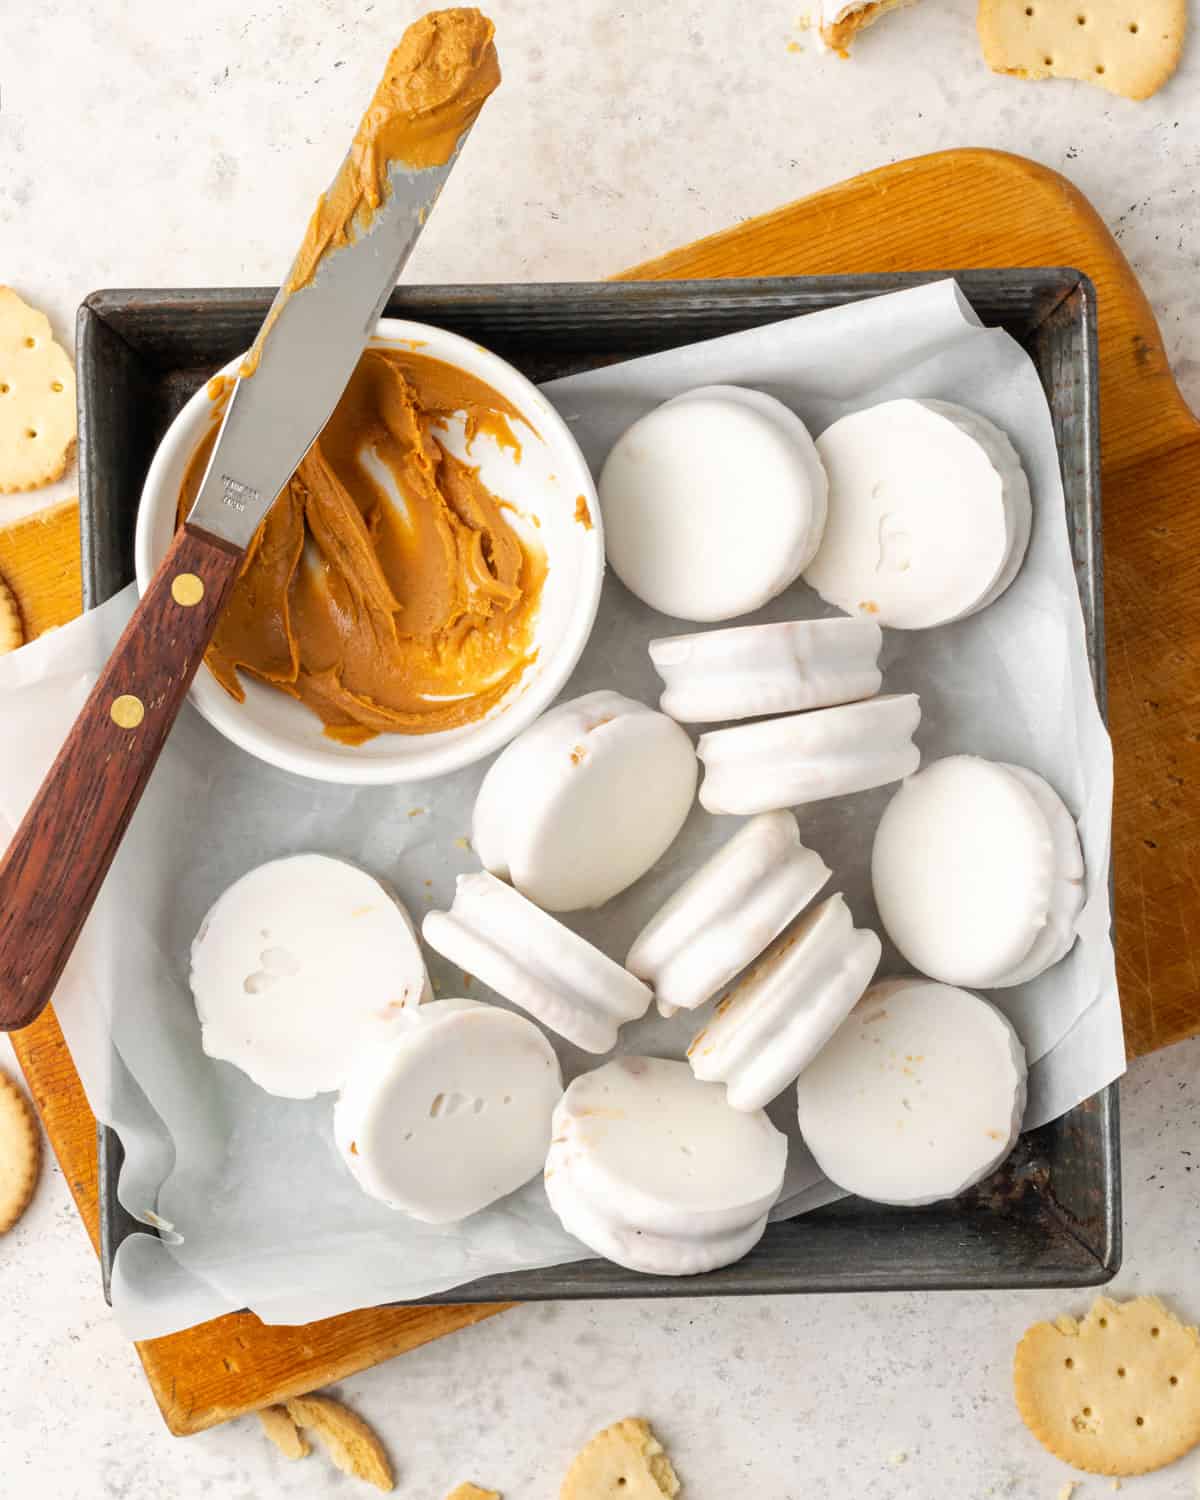 White chocolate covered Ritz cracker cookies sitting in a baking dish next to a bowl of peanut butter.